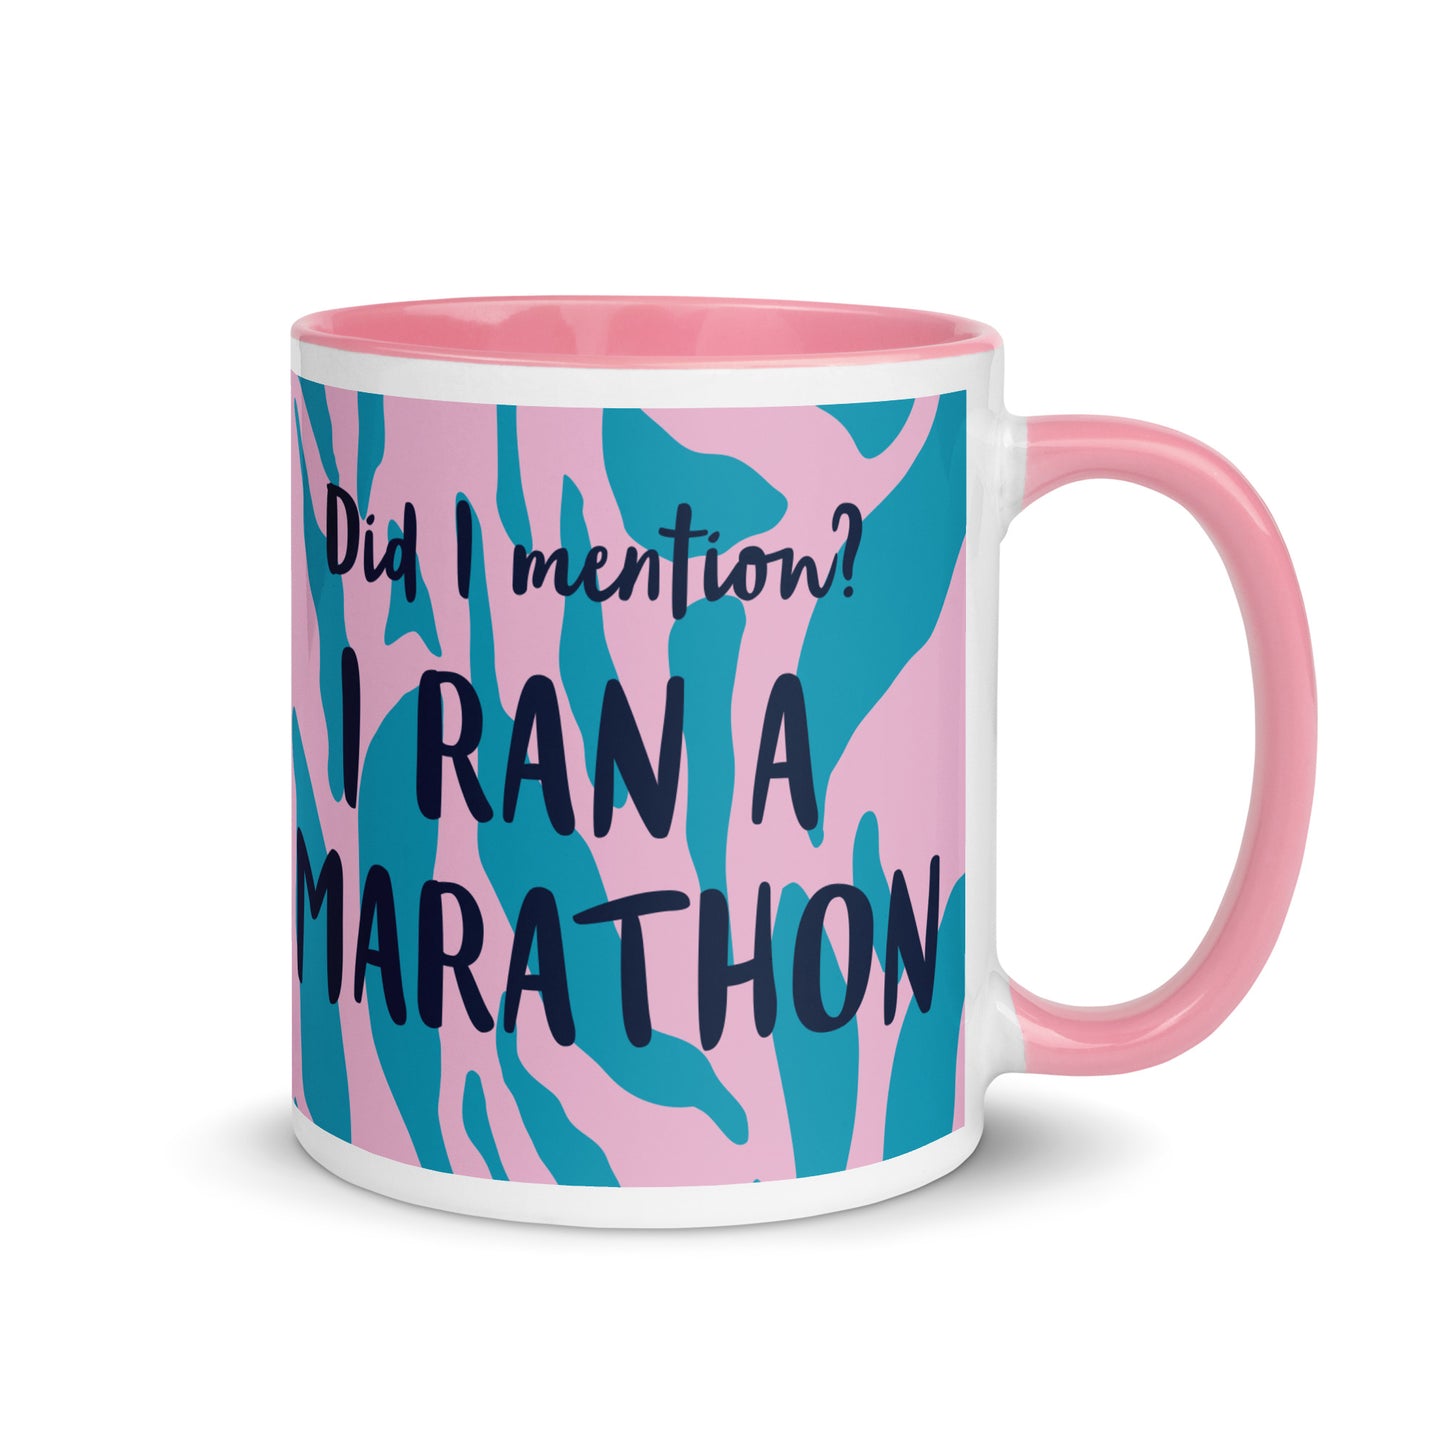 pink handled coffee mug with a pink and blue leopard print design, with the words did i mention? I ran a marathon in a bold font  